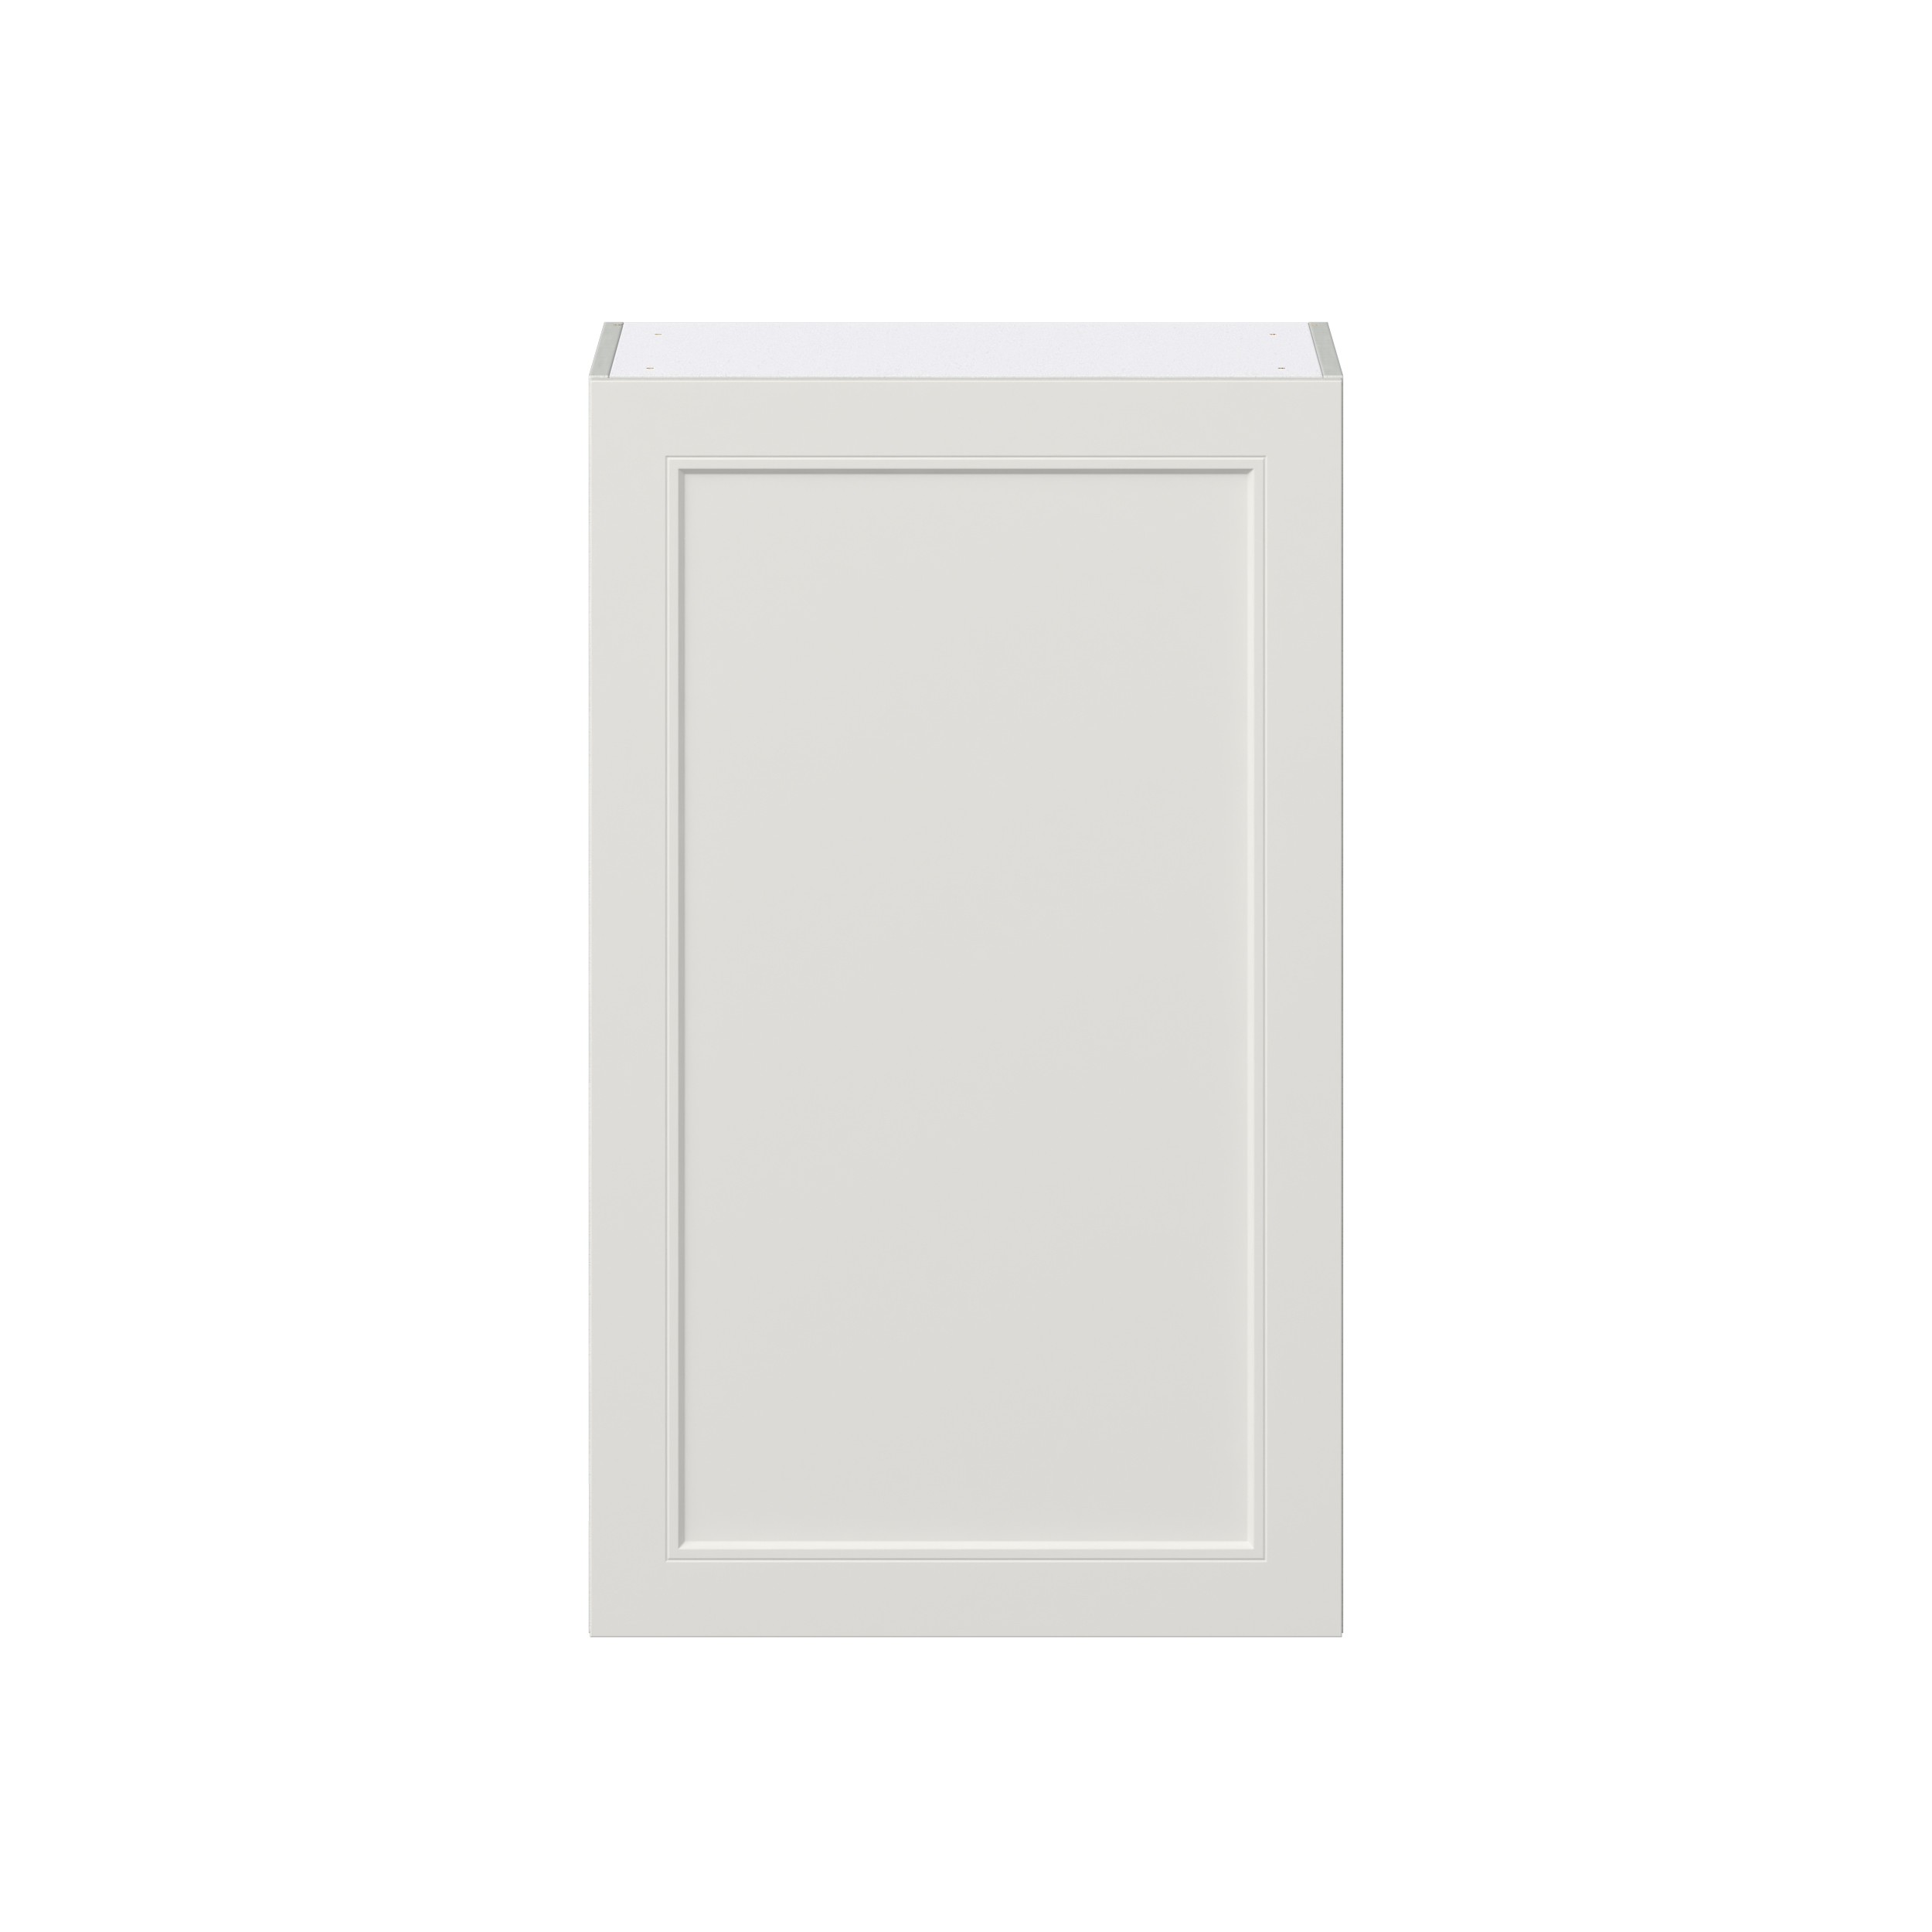 Wisteria Painted Light Gray Recessed Assembled Wall Cabinet with Full High Door (24 in. W x 40 in. H x 14 in. D)